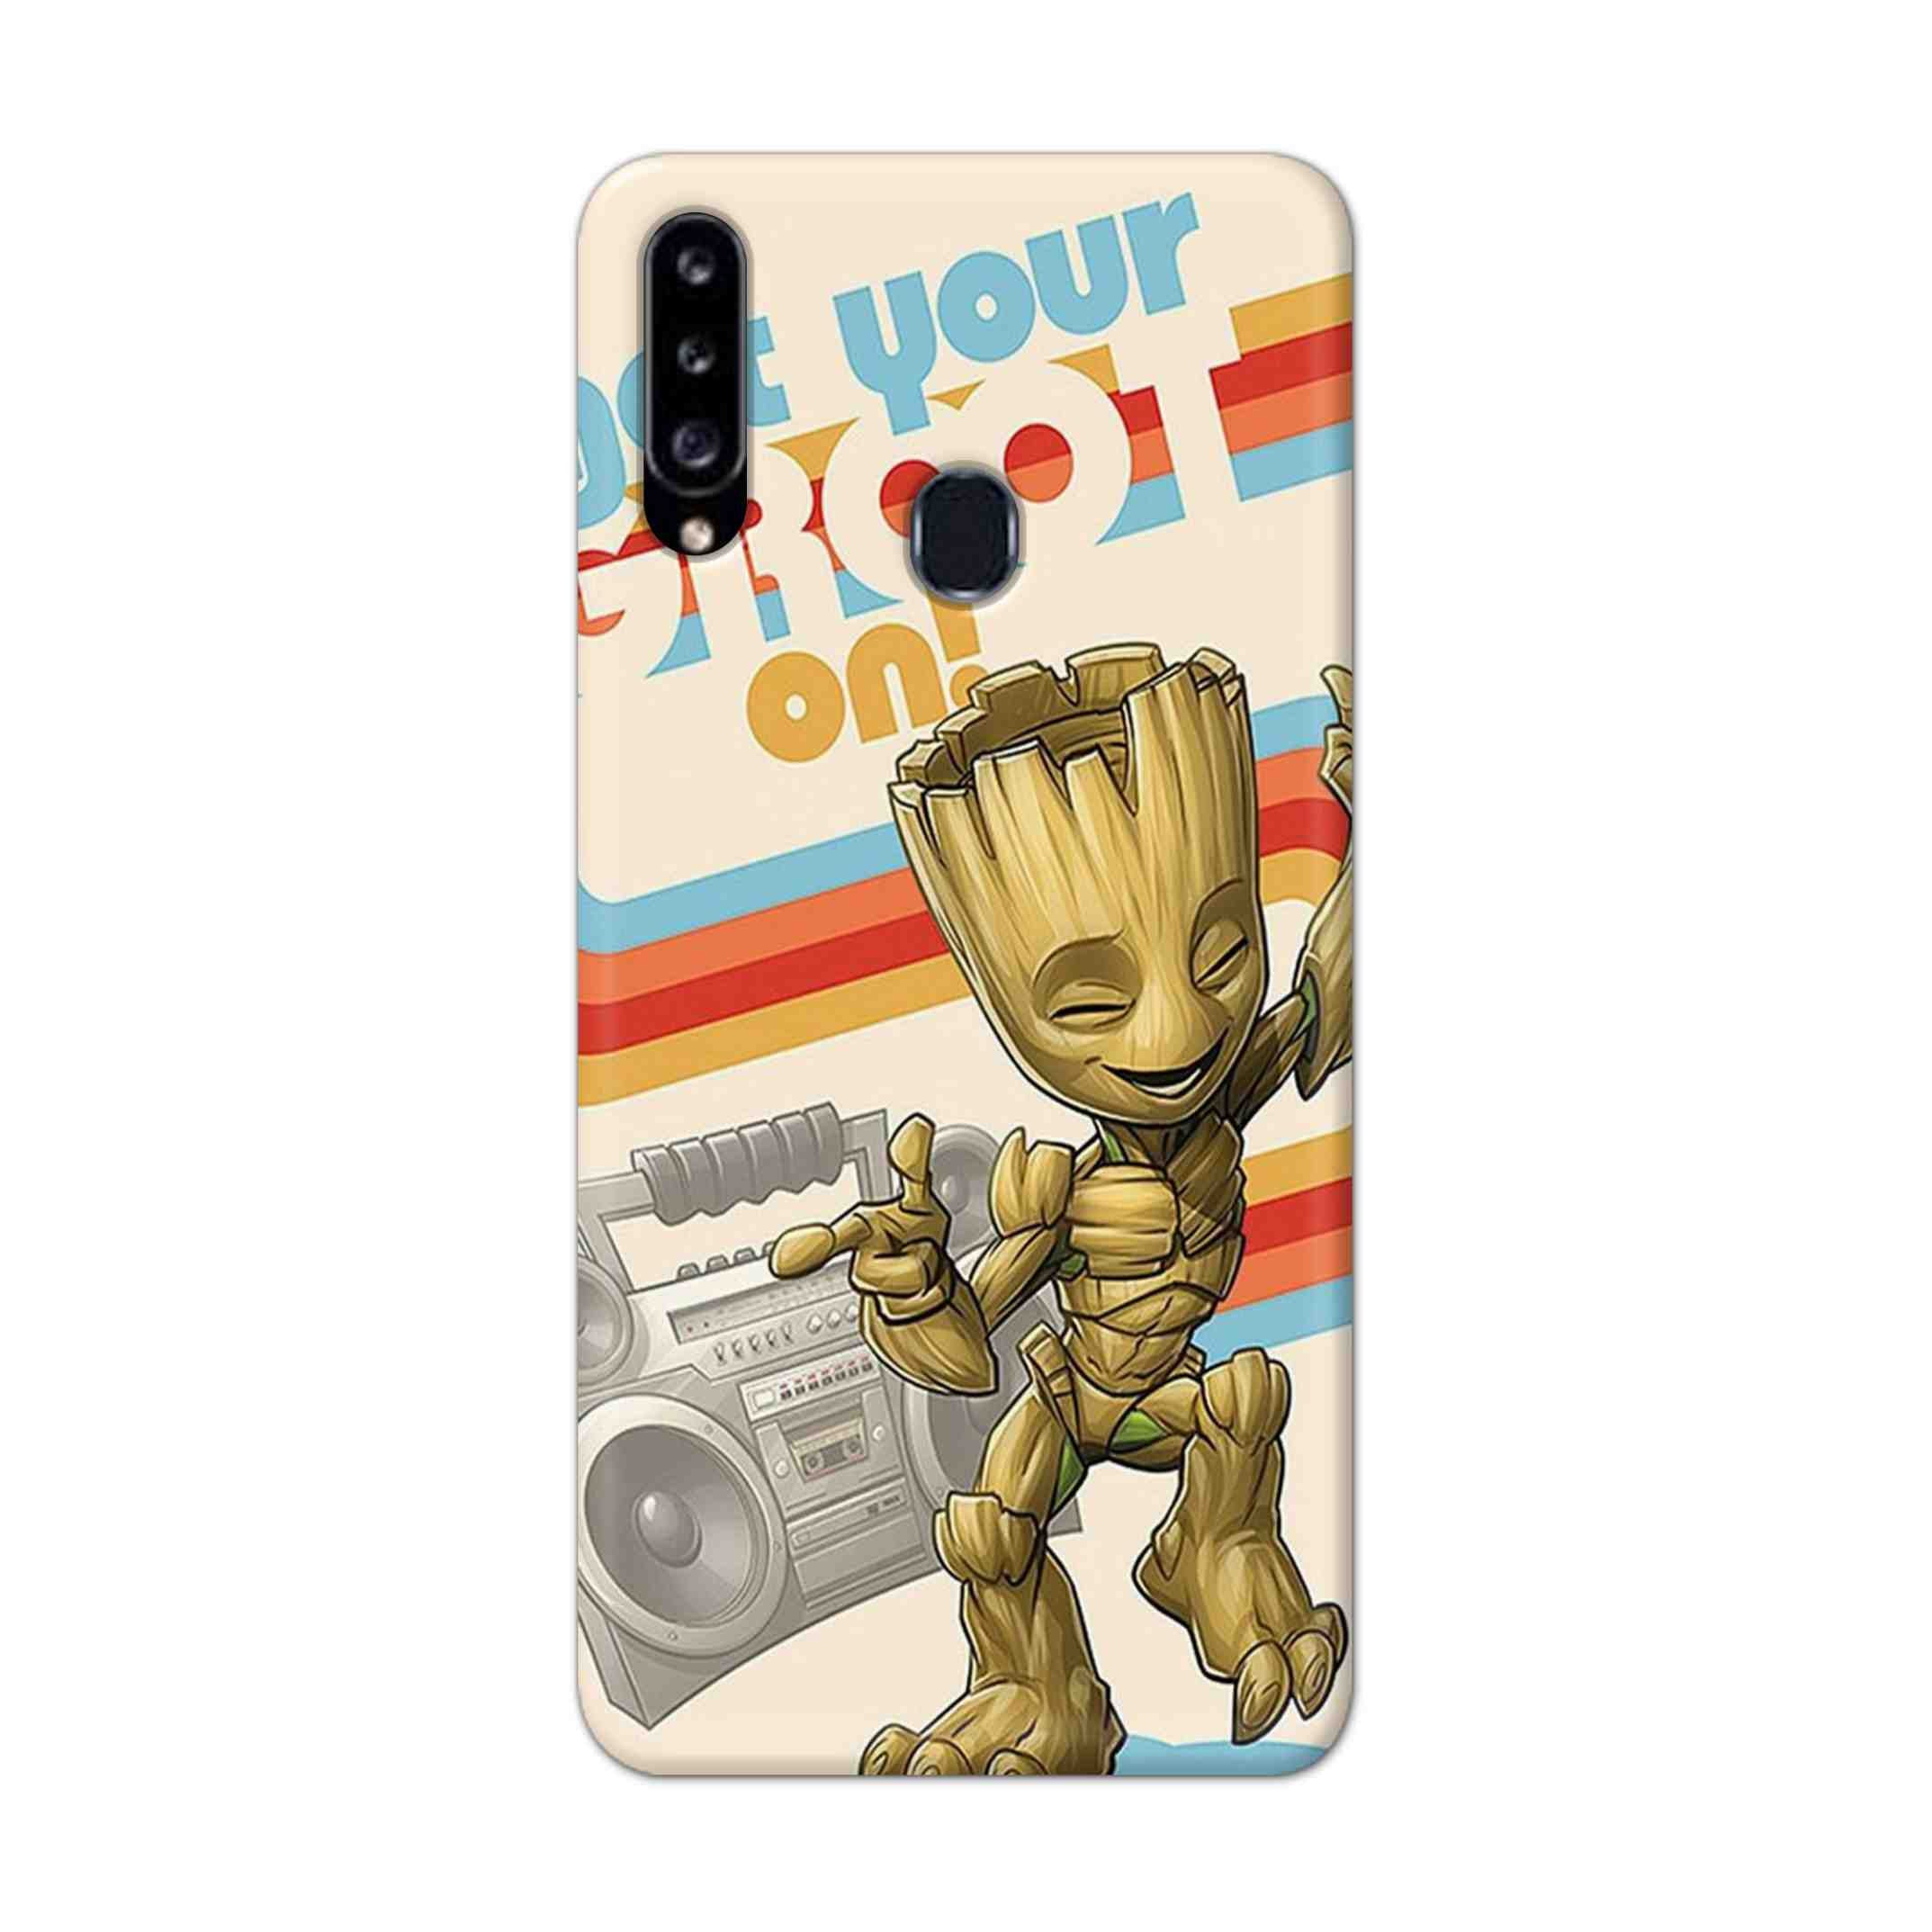 Buy Groot Hard Back Mobile Phone Case Cover For Samsung Galaxy A21 Online